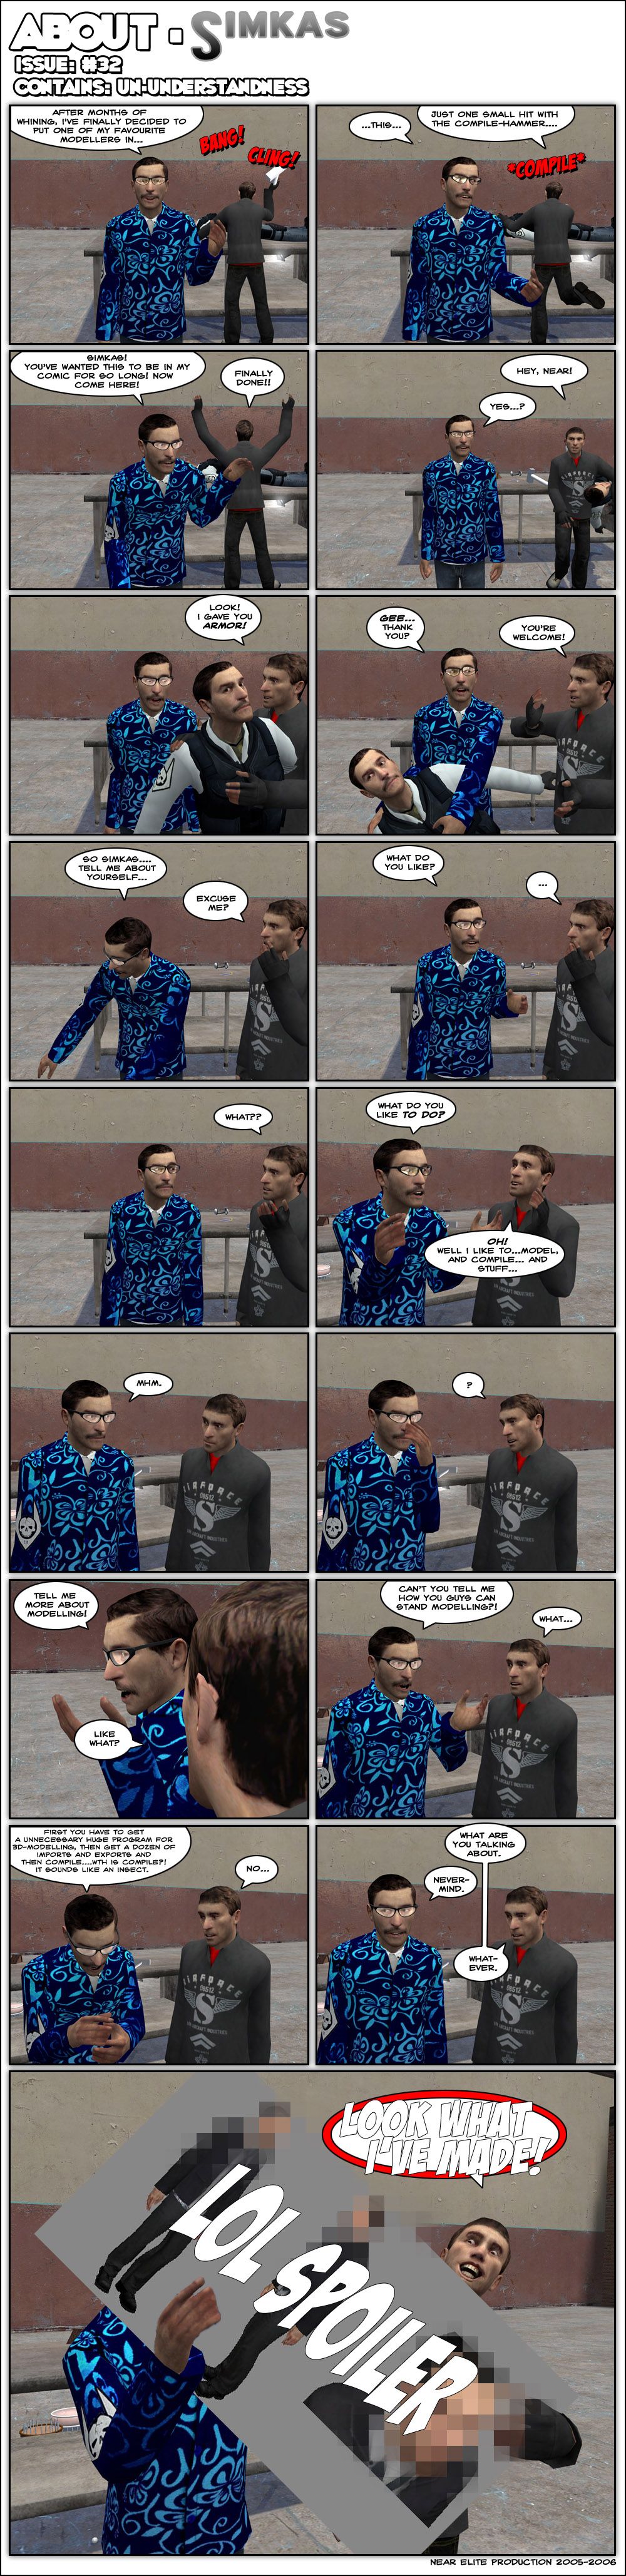 Near Elite is talking to the camera while, on the background, Simkas is hitting something with a hammer multiple times. Near explains that, after months of whining, he's finally decided to put one of his favorite modellers in this. Near then realizes Simkas is distracted and tells him he wanted to be in this comic for so long, so come here. Simkas declares his work is finally done and walks up to Near Elite with something beneath his arm. Simkas says he gave Near armor and gives him a body clone of Near Elite with armor on. Near, holding his near-identical body, says a confused thank you, to which Simkas replies he's welcome. Near drops his copy and asks Simkas to tell him about himself. Simkas says excuse me and Near asks what he likes. Simkas asks what and Near insists, asking what Simkas likes to do. Simkas replies he likes to model, compile and stuff. Near says uh-huh, then a pause, and finally Near asks that Simkas tell him about modelling. Simkas asks like what and Near asks him how he can stand modelling. Simkas is confused as Near mumbles that first you have to get an unnecessarily huge program for 3D modelling, then get a dozen of imports and exports and then compile. Near asks under his breath what the hell is compile and says that it sounds like an insect. Simkas asks him what he's talking about and Near replies nevermind. Simkas says whatever, then cheerfully shoves a large censored image into Near's face, screaming look what I've made. The end.